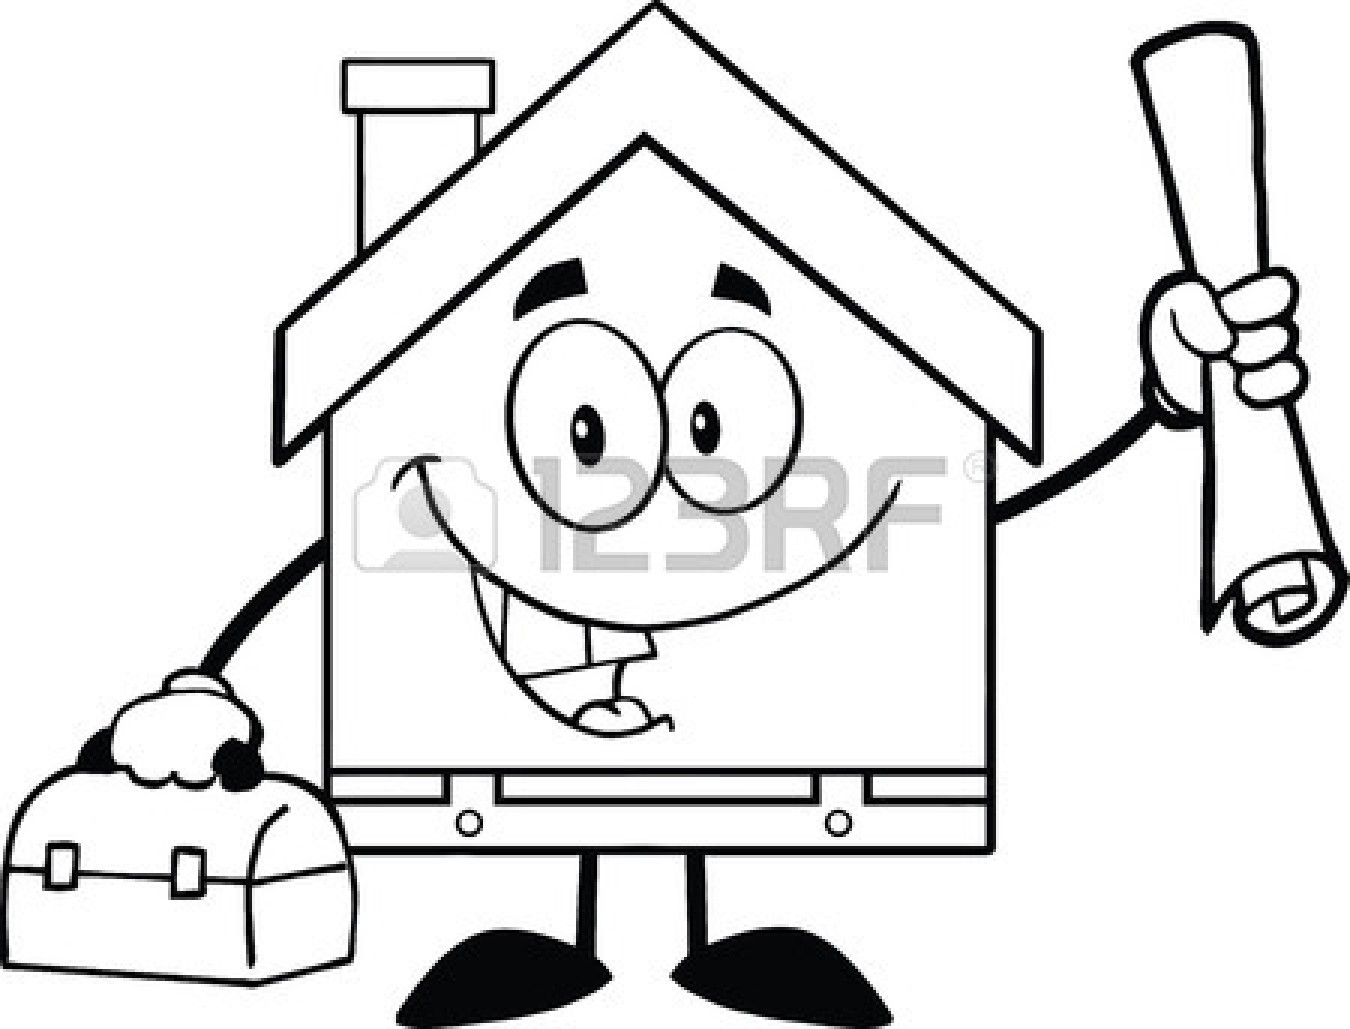 Mansion Drawing   Clipart Panda   Free Clipart Images